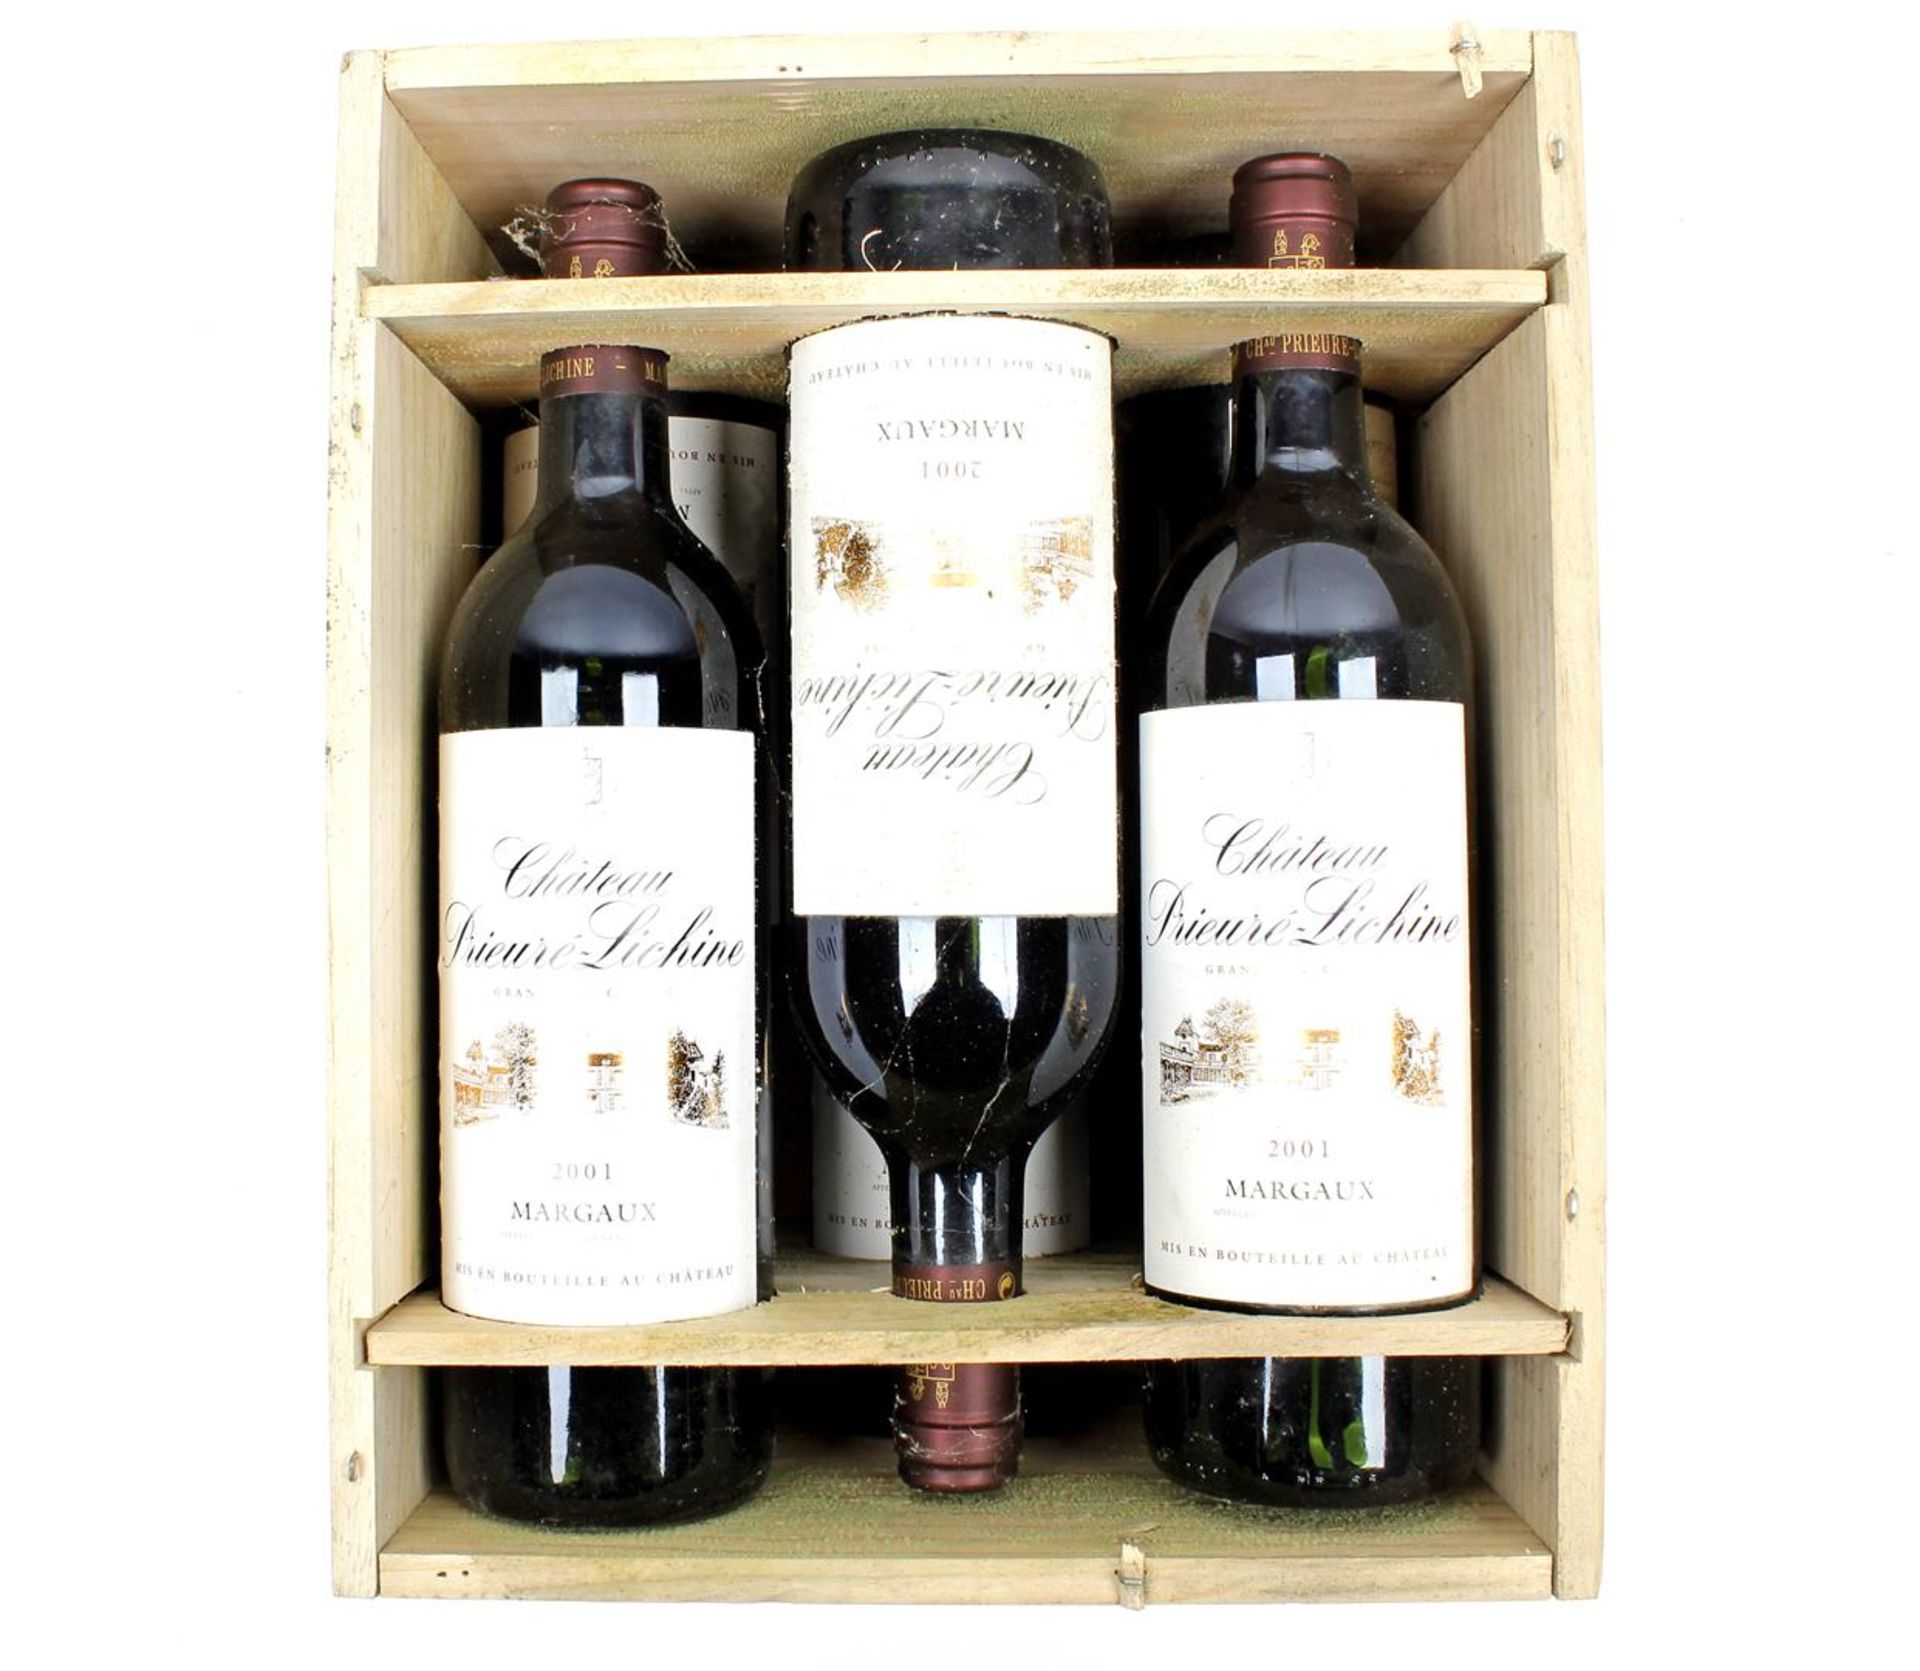 6 bottles of Chateau Prieure Lichine Margaux 2001